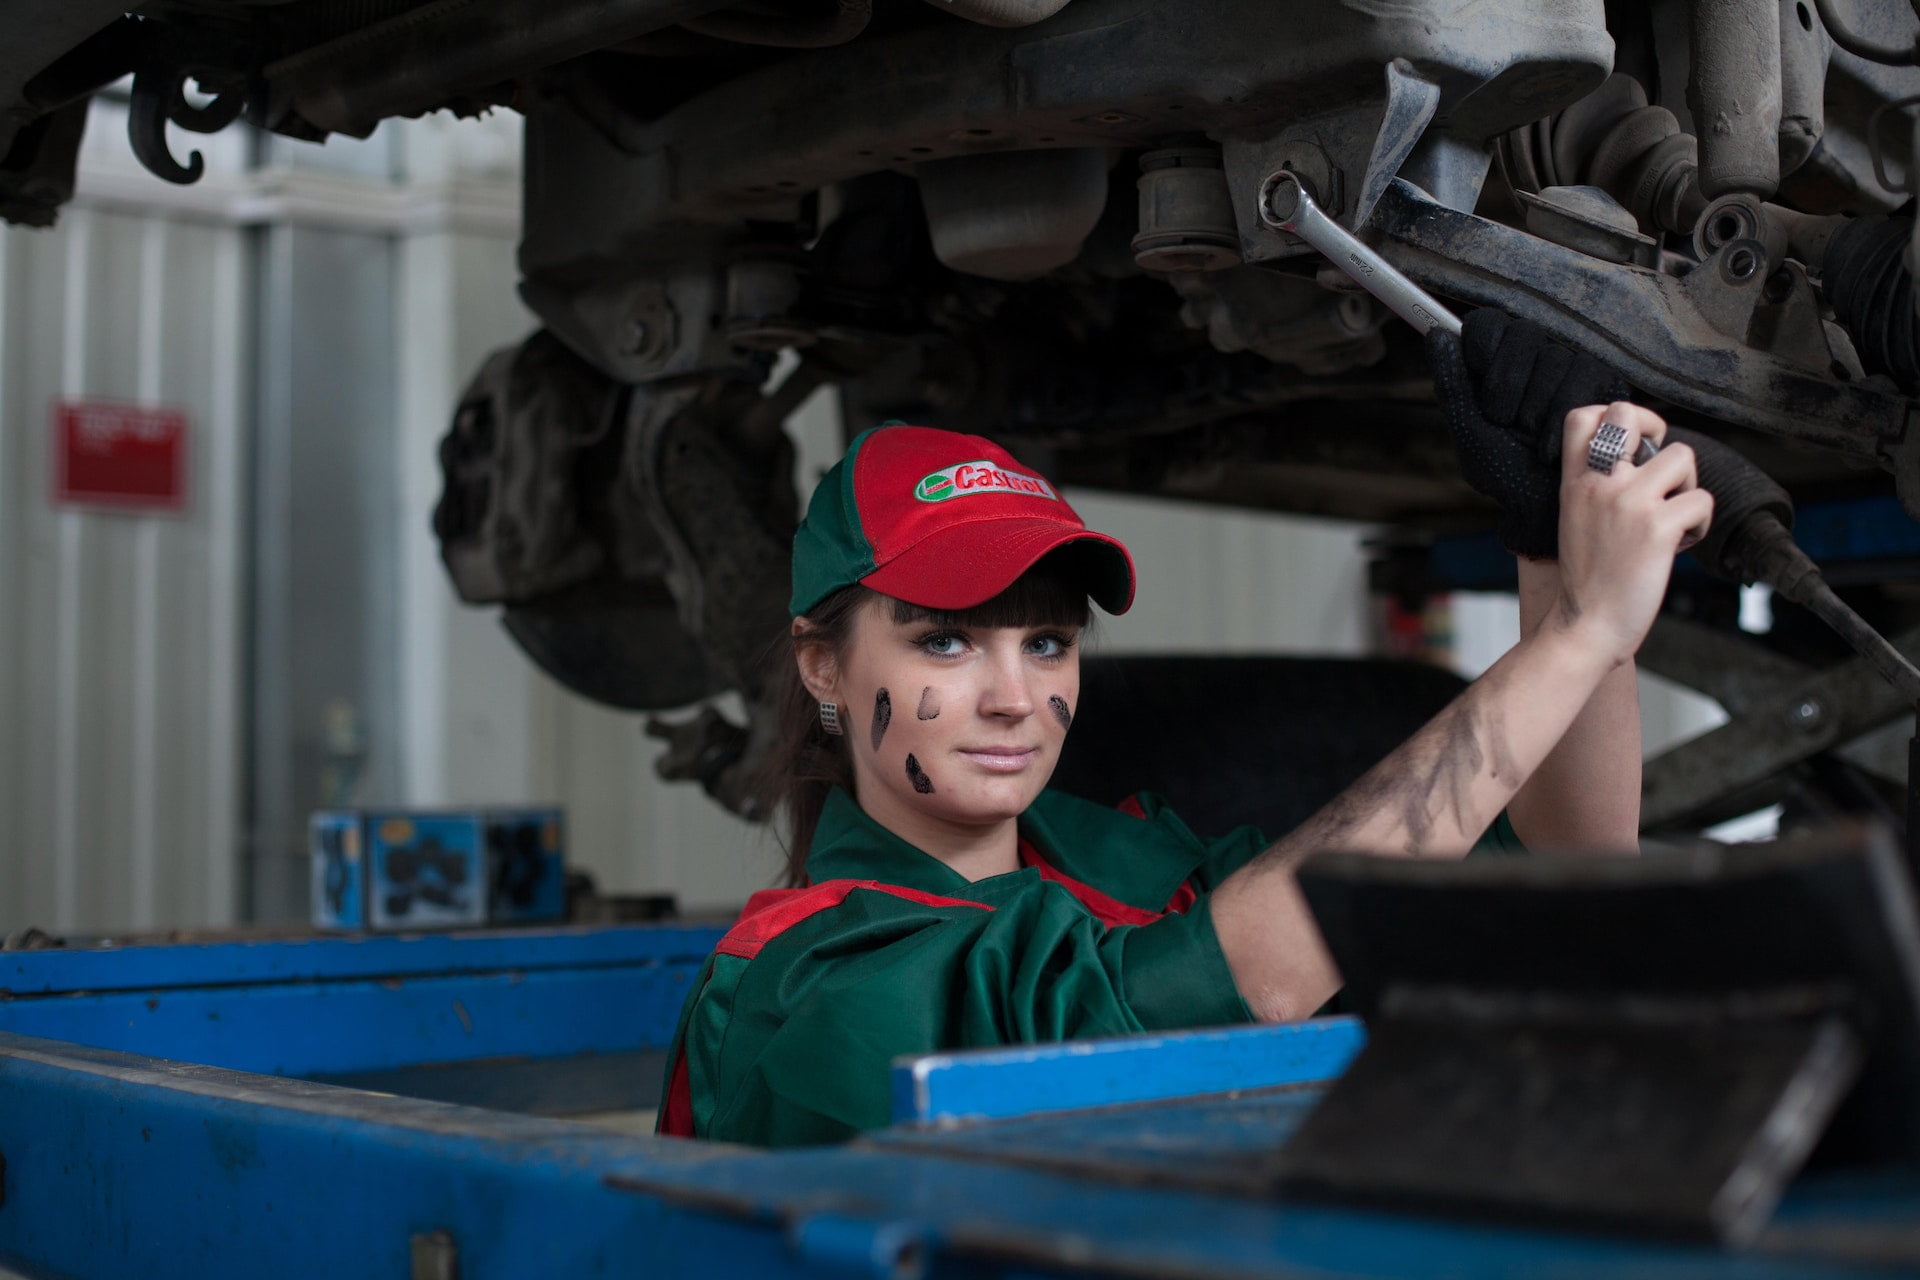 8 Safety Practices to Follow When Changing Your Vehicle's Oil